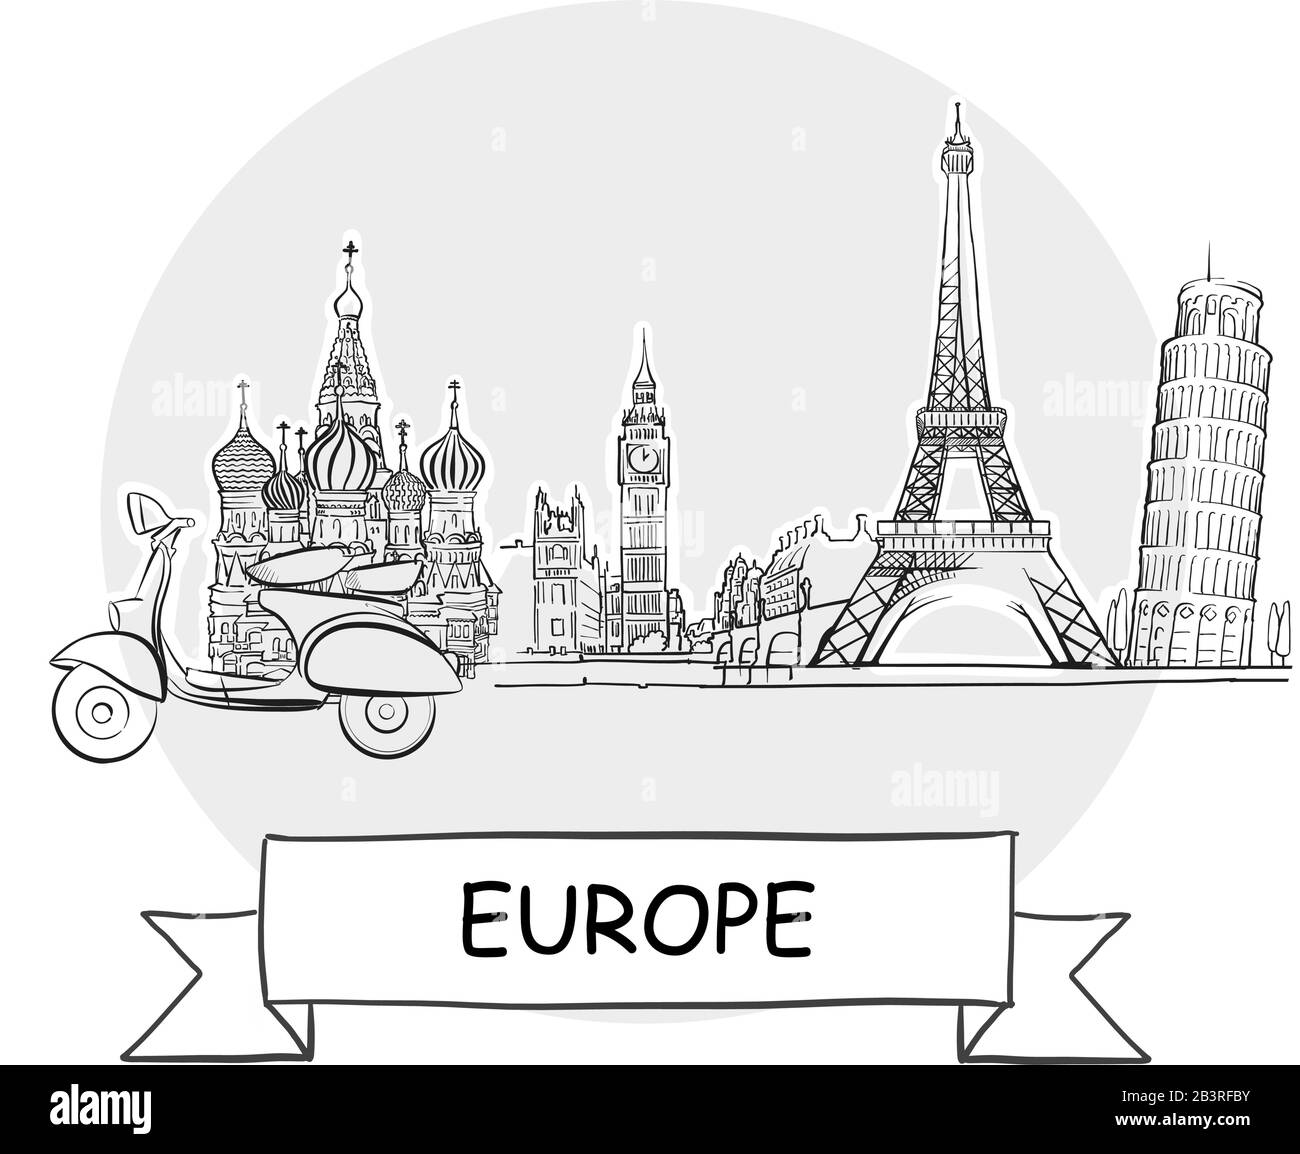 Europe Hand-Drawn Urban Vector Sign. Black Line Art Illustration with Ribbon and Title. Stock Vector